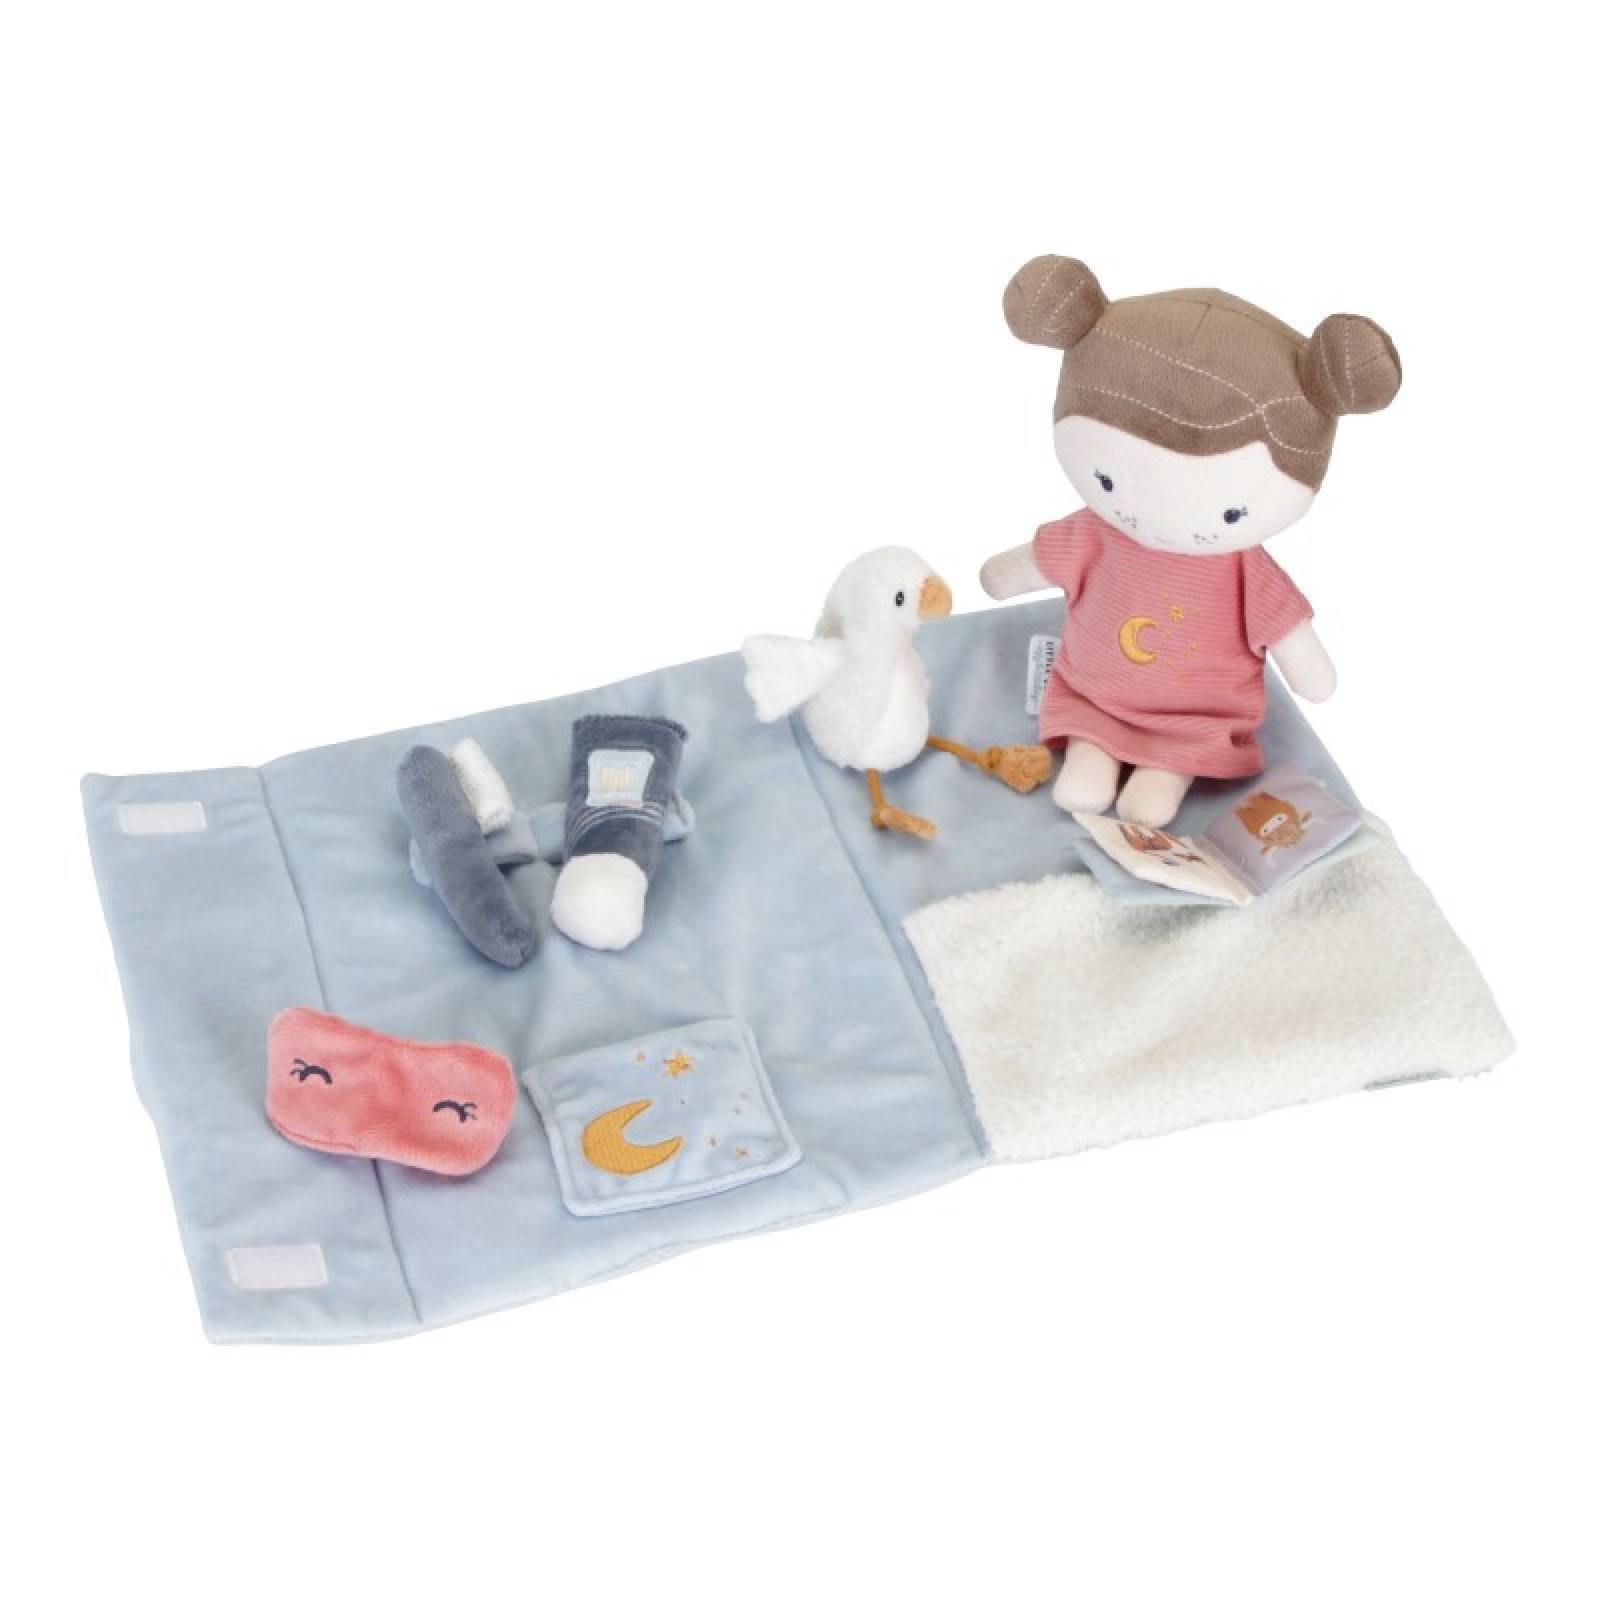 Sleepover Play Set With Doll 1+ thumbnails